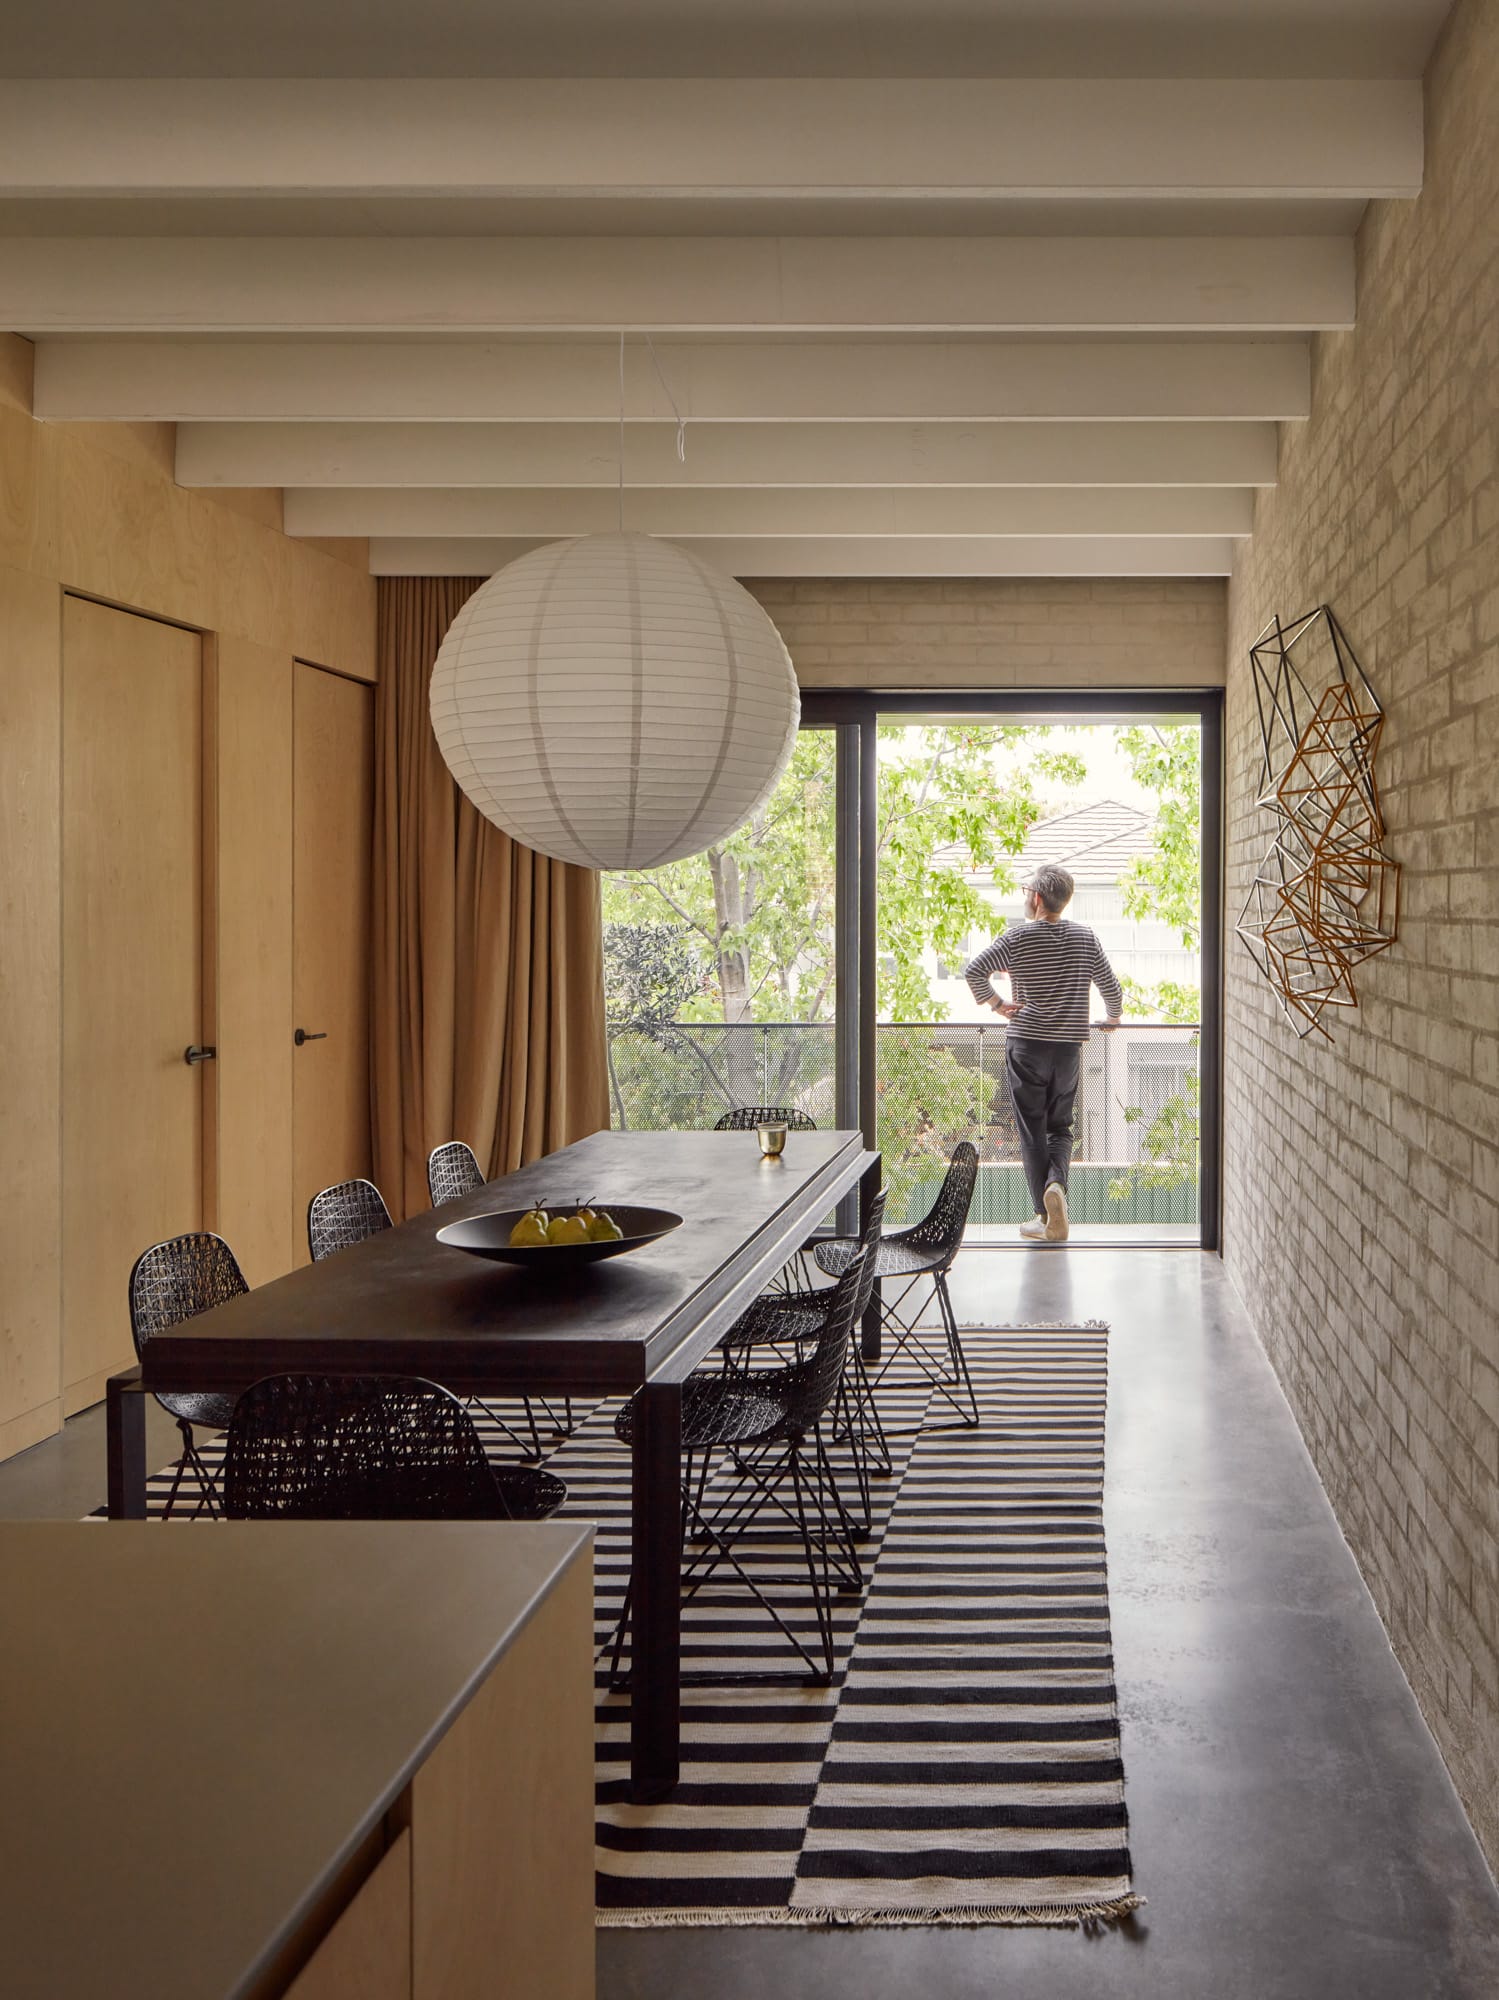 Brick House by Studio Roam. Photography by Jack Lovel. Large black dining table with black dining chairs. Polished concrete floors. Brick wall to right, plywood wall to left. Dining space extending out to balcony overlooking street. 